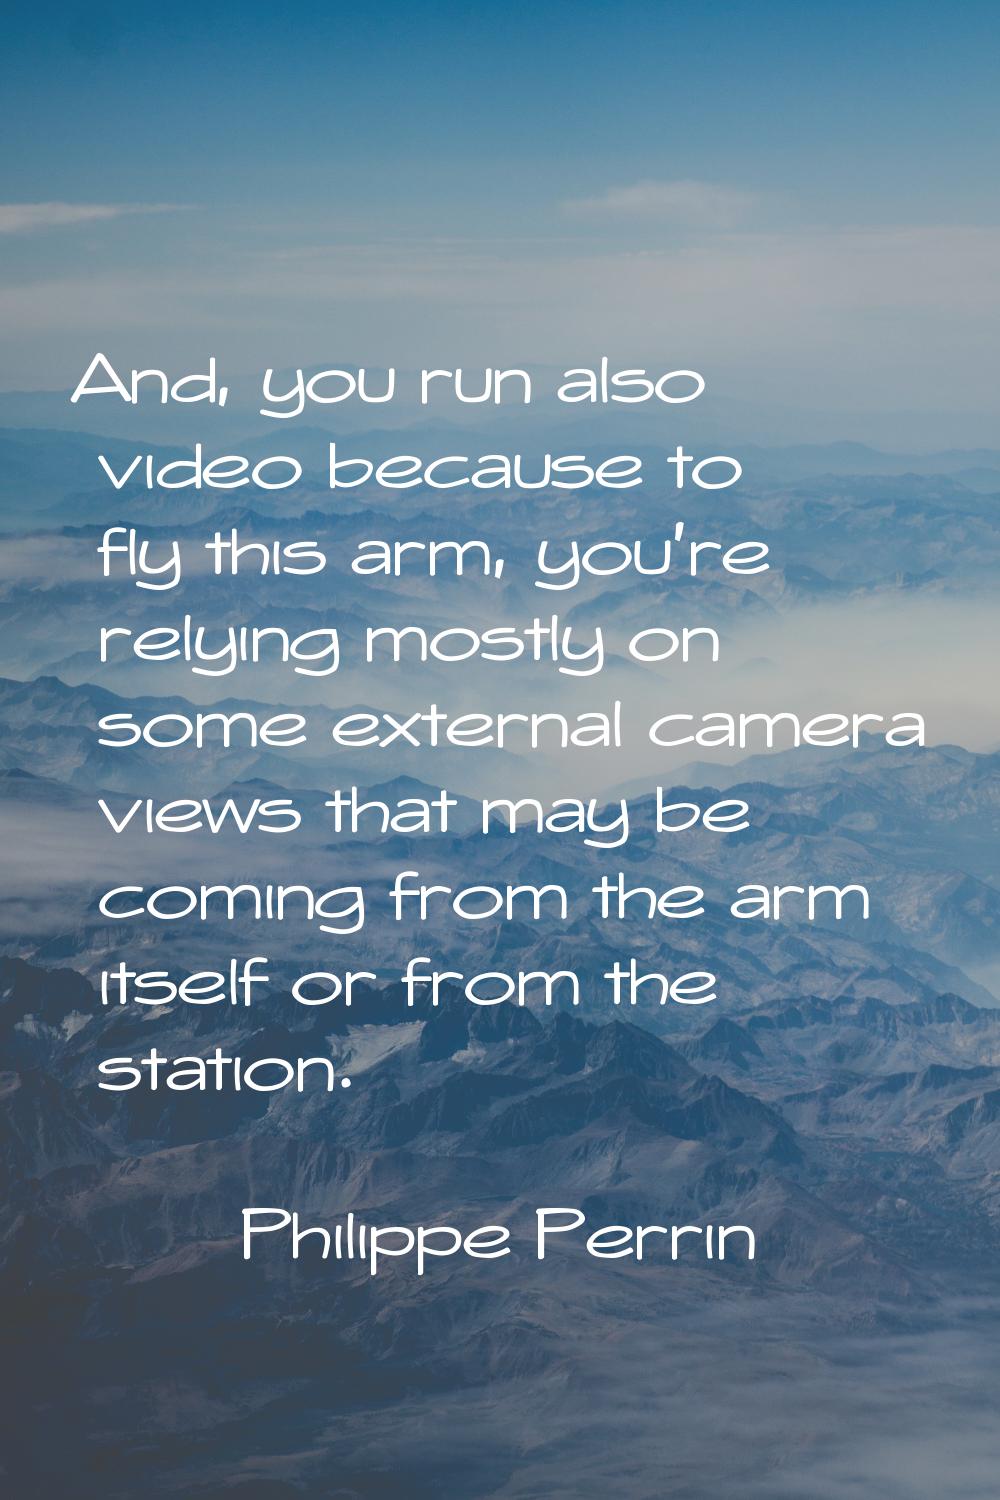 And, you run also video because to fly this arm, you're relying mostly on some external camera view